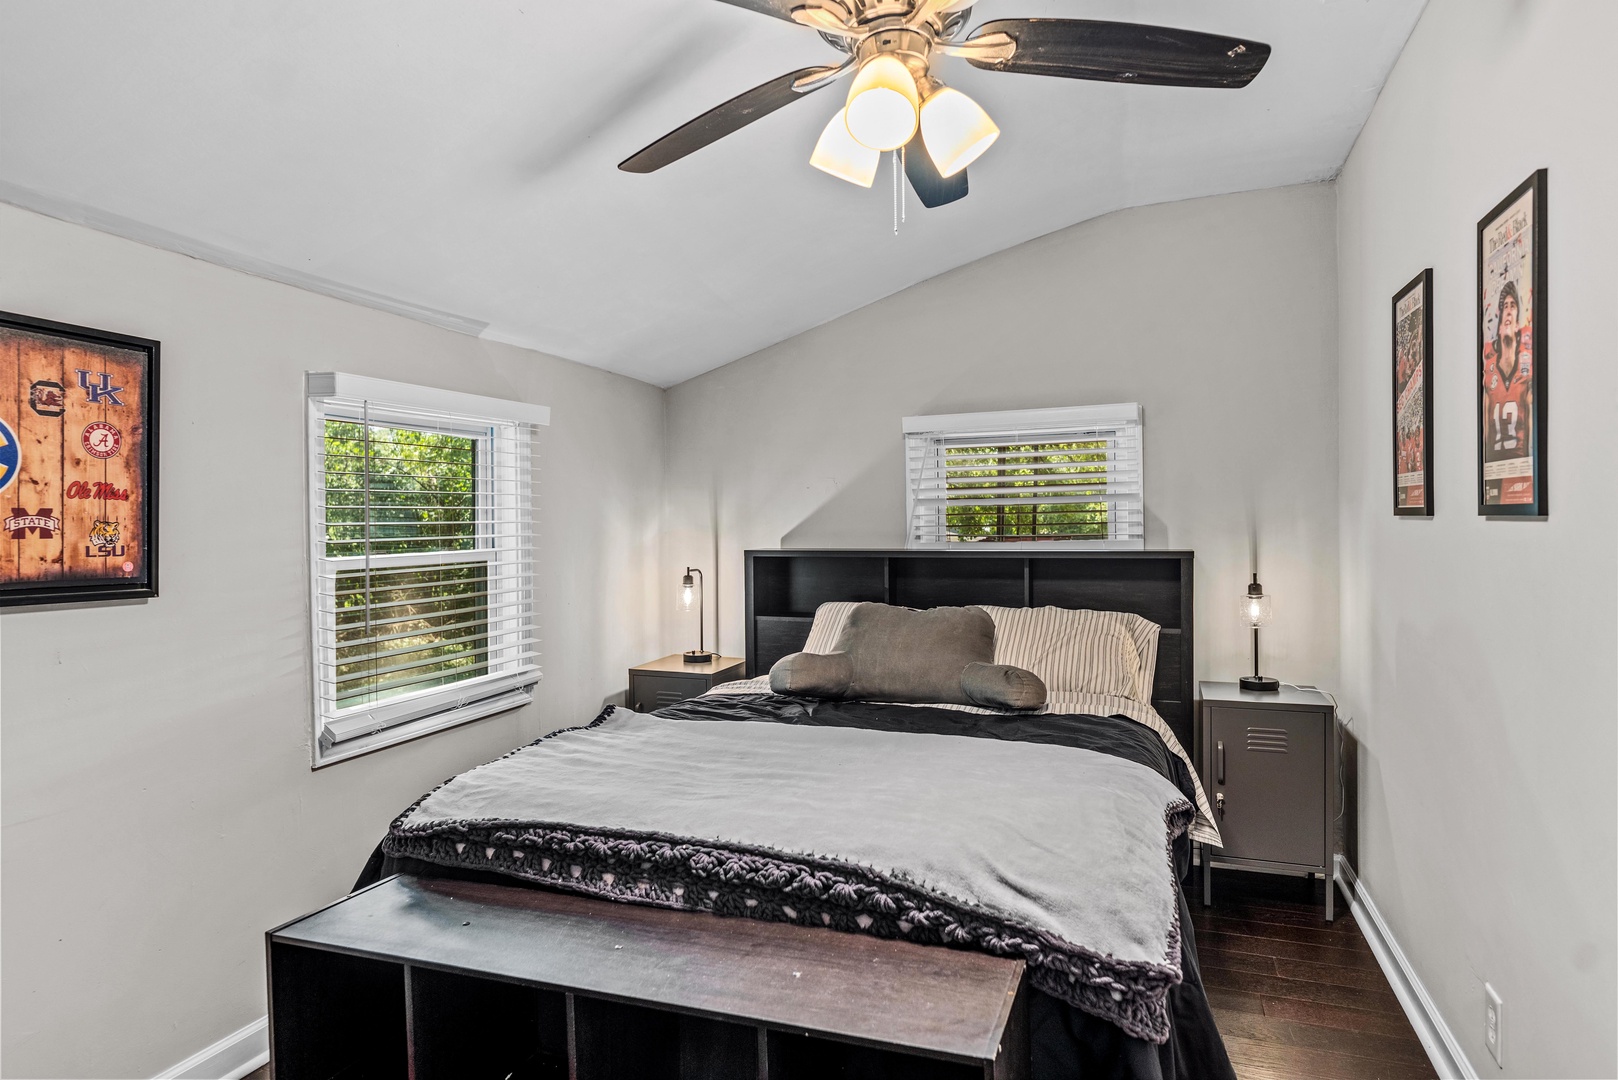 The main bedroom offers a queen-sized bed & ceiling fan